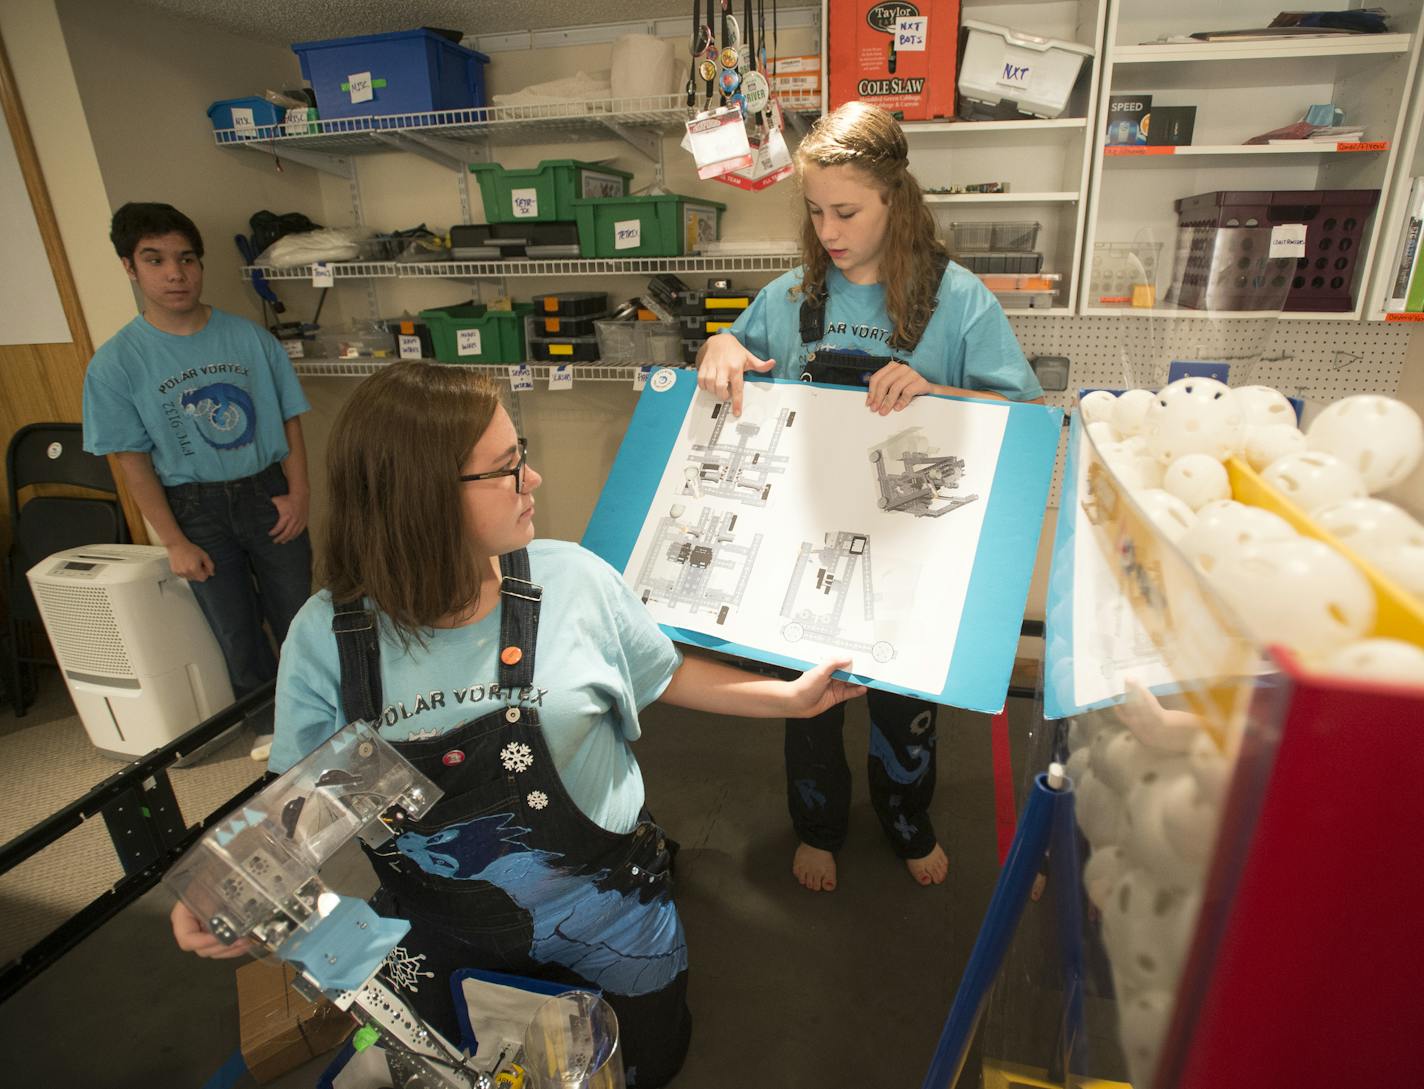 High school freshmen Bella Vandenbos, left of center, and Corrie Hester held up the blueprints for their robot, &#x201c;FrostByte,&#x201d; during a meeting of the Polar Vortex robotics team in Hester&#x2019;s basement Tuesday night.